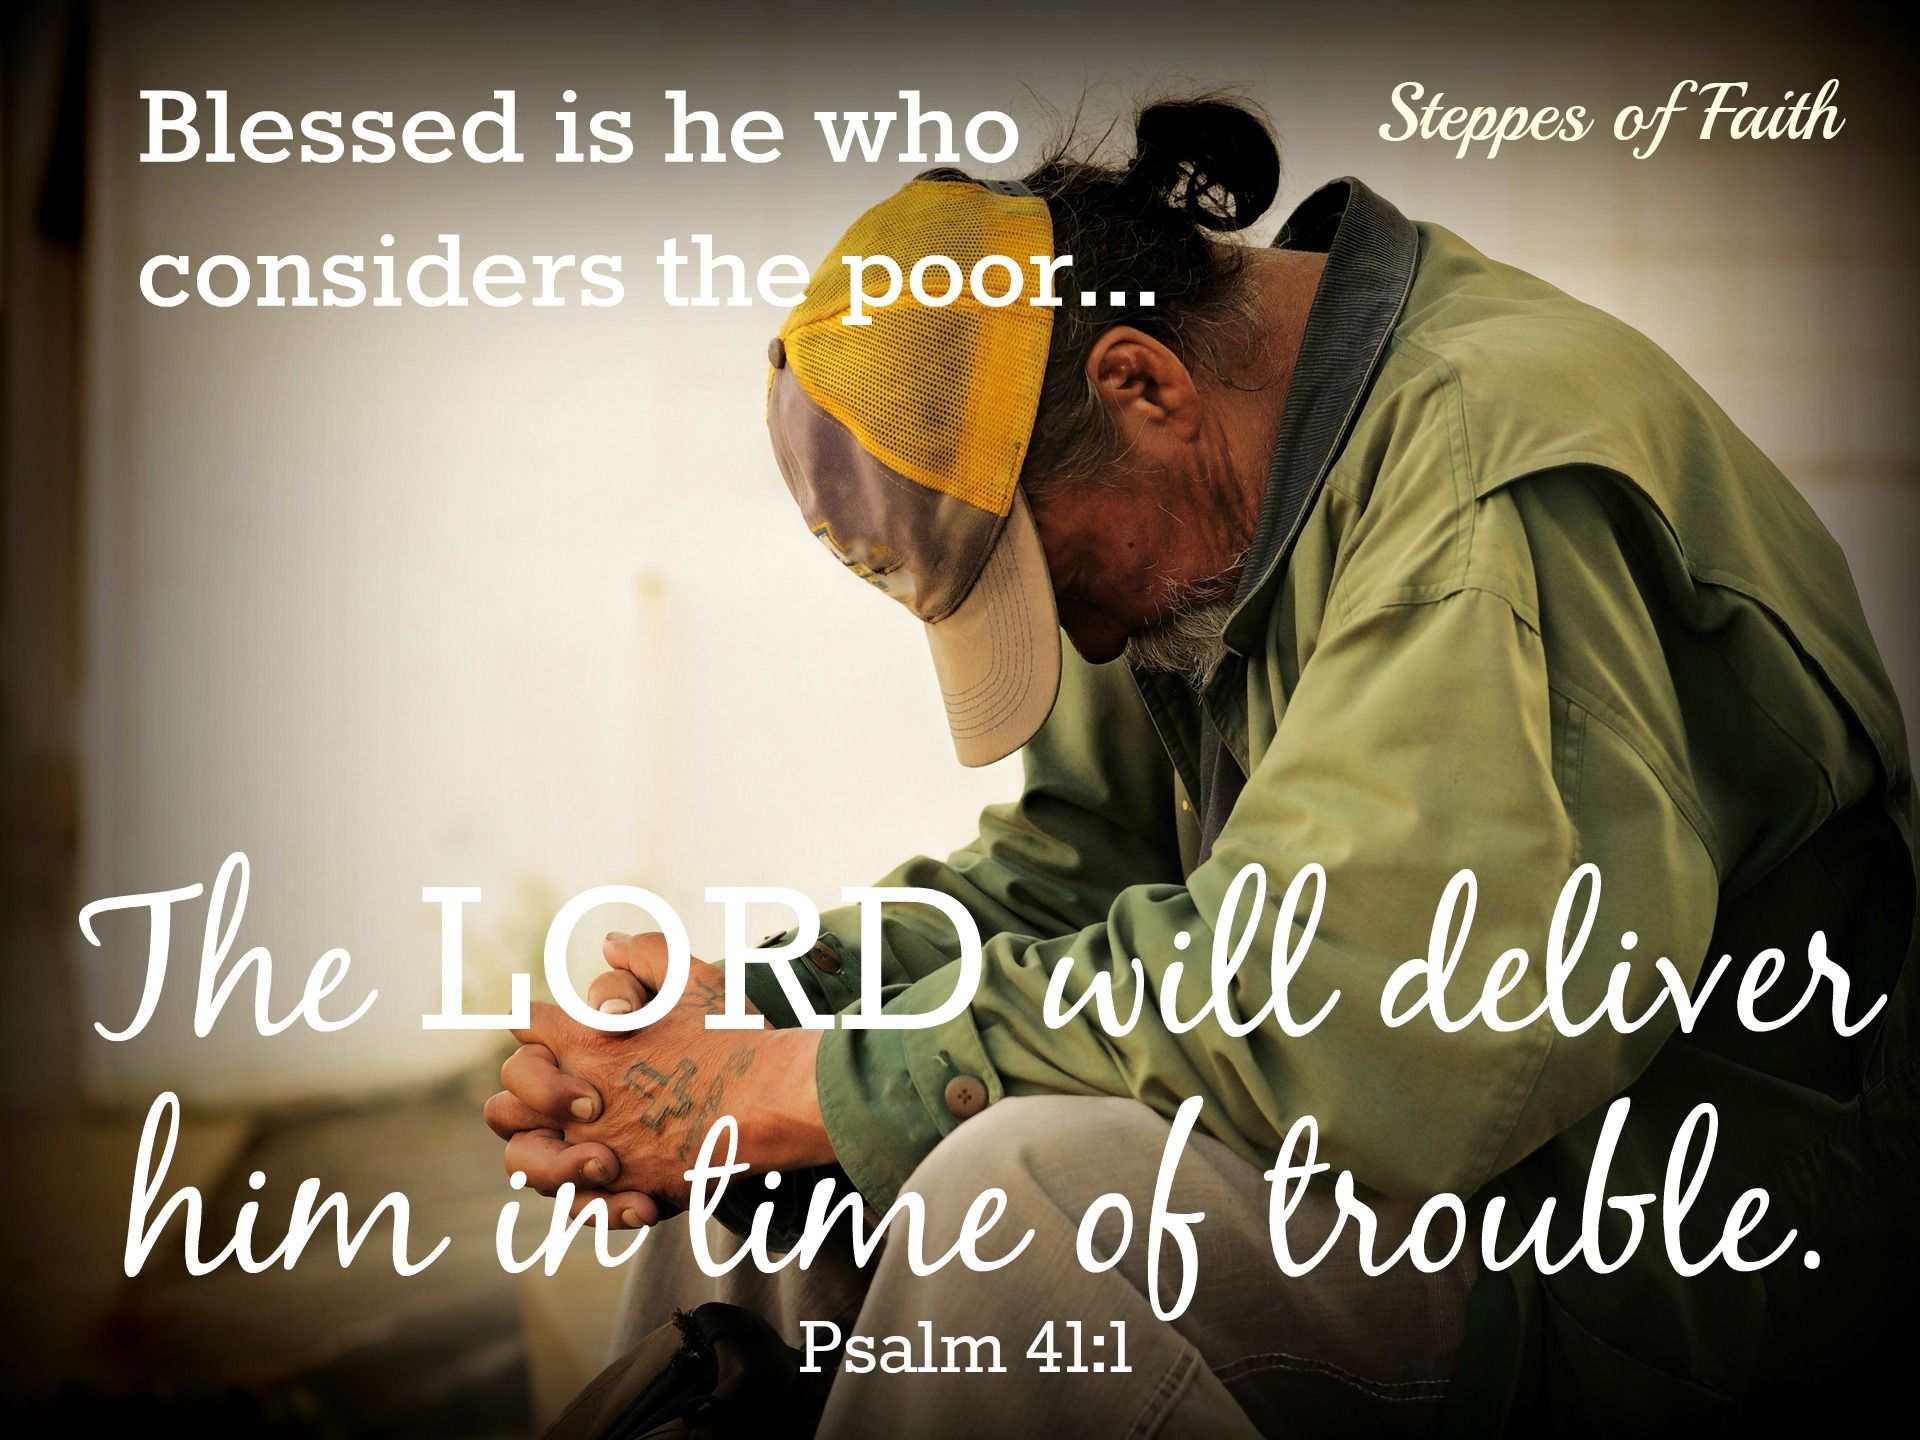 The Lord is our Protector and Provider. He's anxious to help those ...